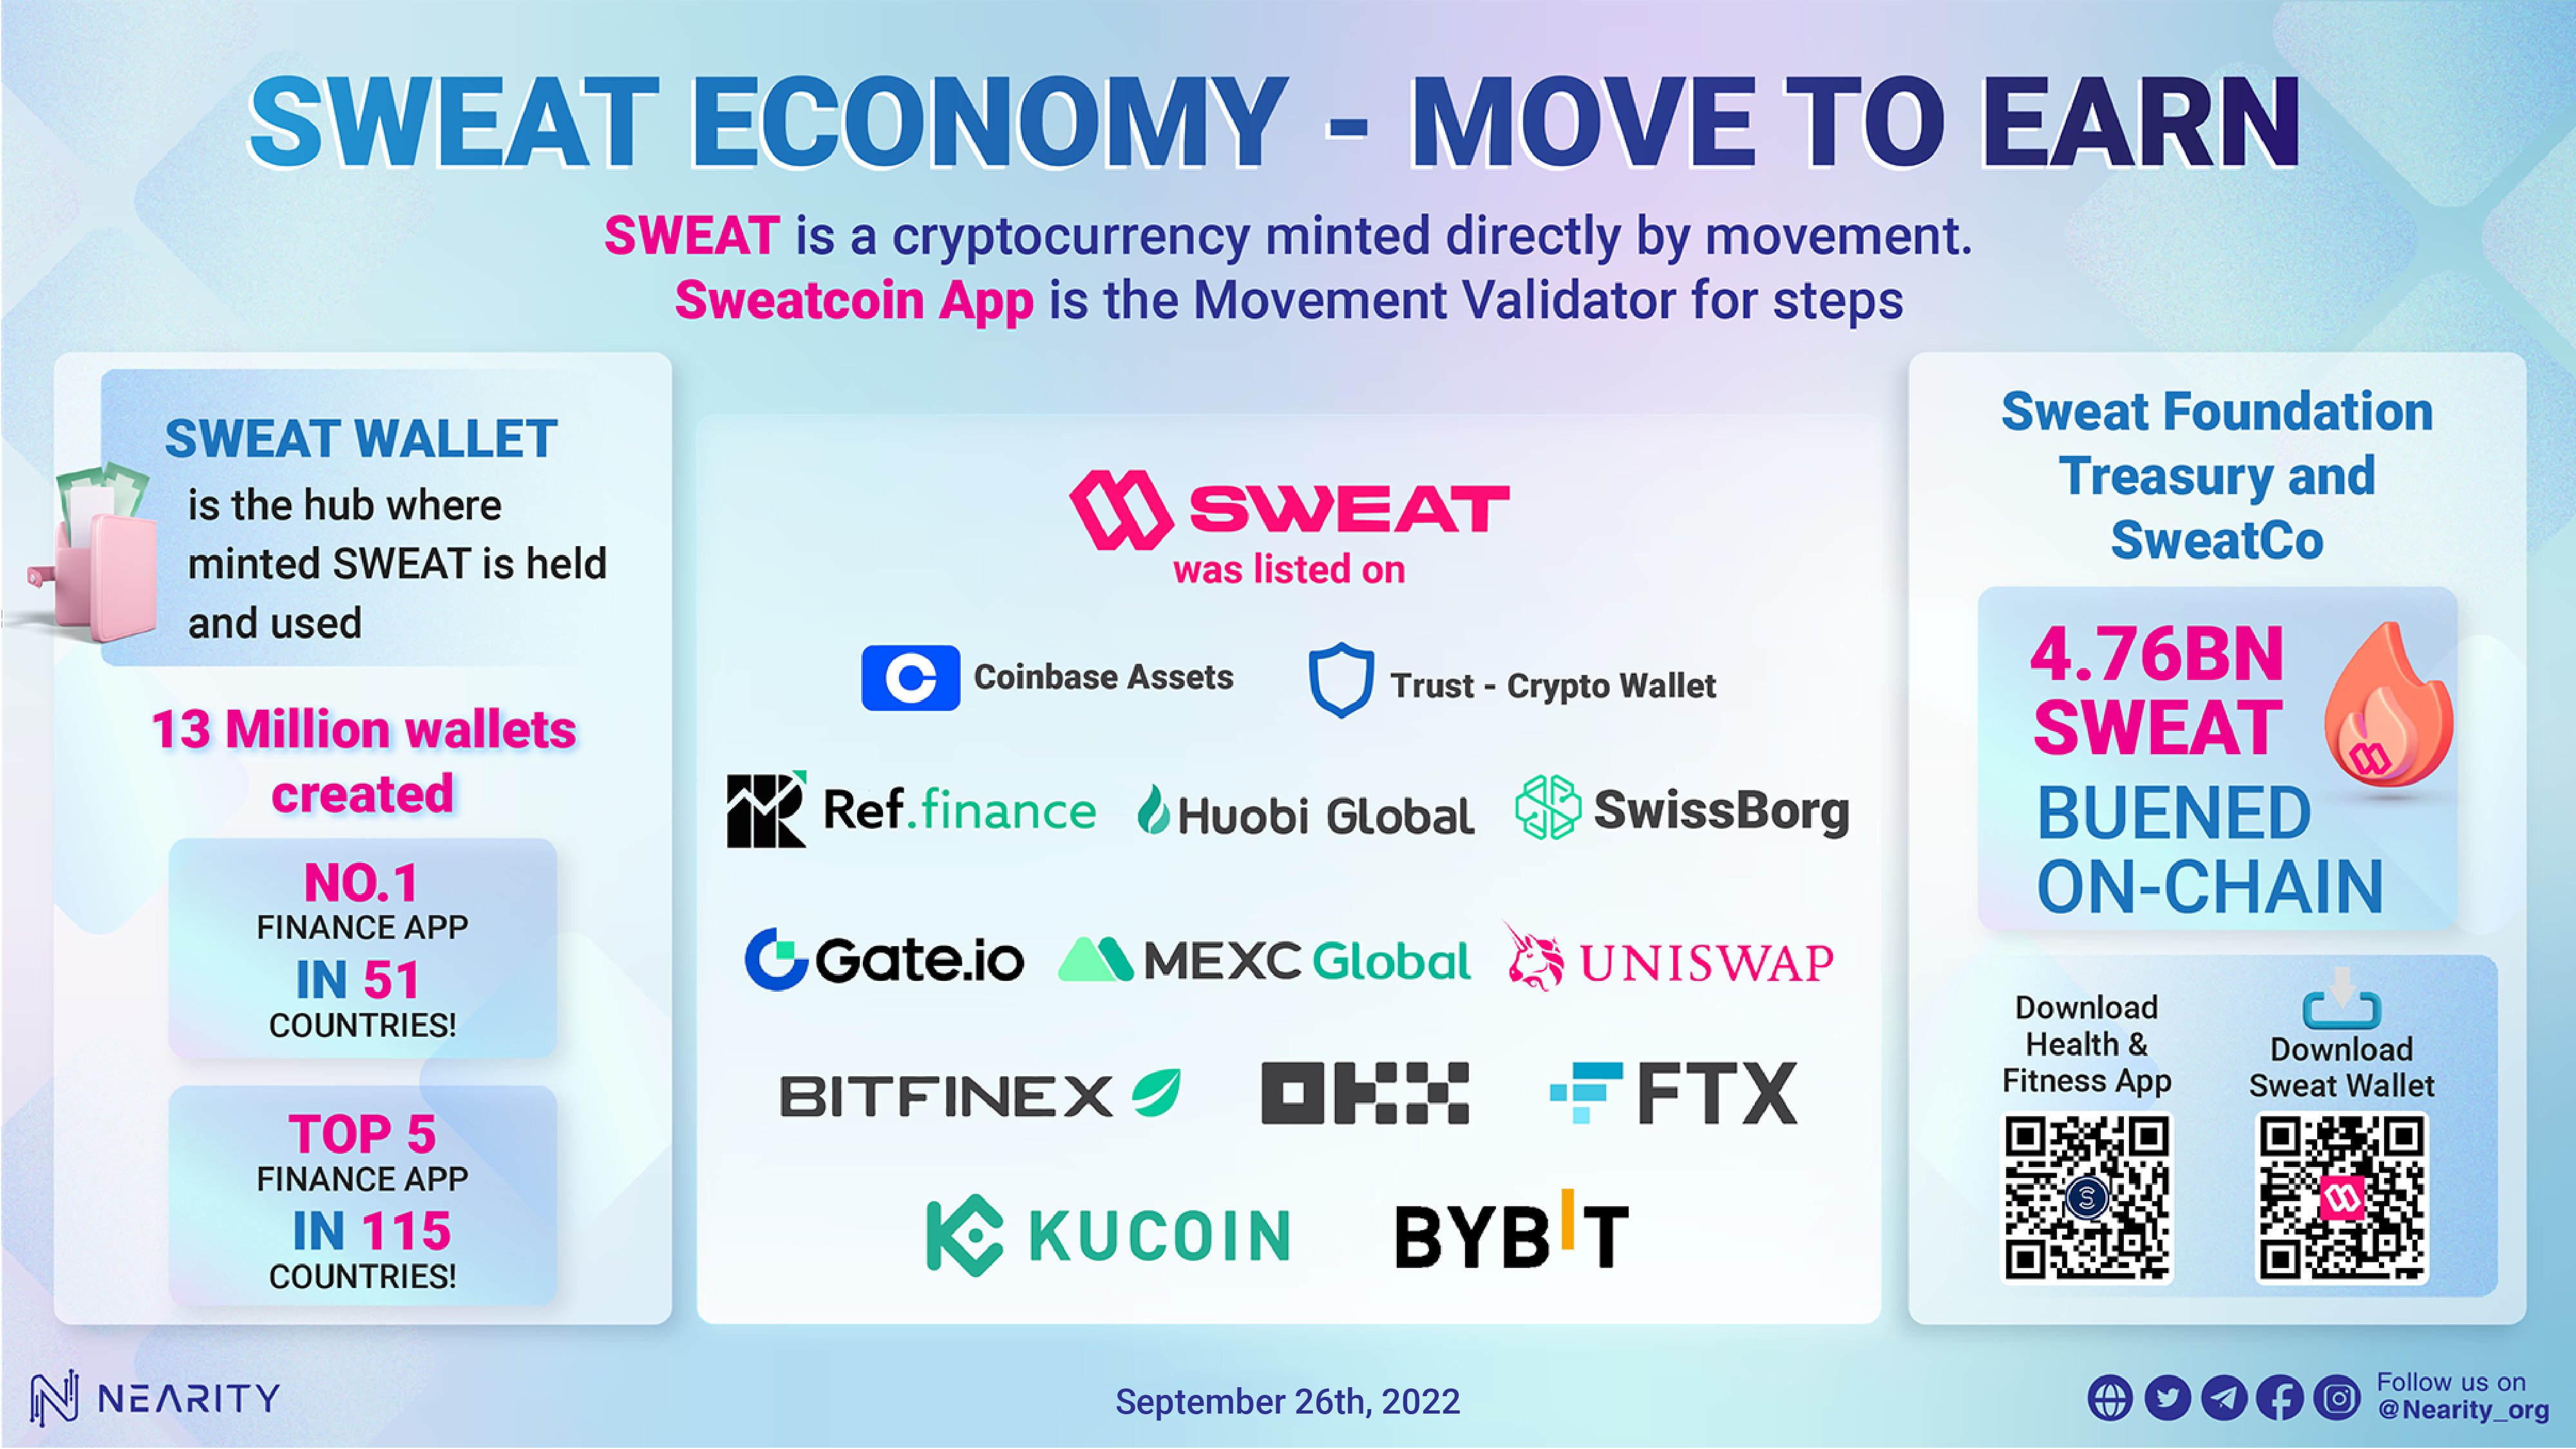 Highlight SweatEconomy - move to earn #Sweateconomy is a project #minted by moving. TheSpartanLabs talked about the future of sustainable Move-to-Earn Models in: https://twitter.com/TheSpartanLabs/status/1572588437752123392 Some more information in the picture #NEAR #NEARITY $NEAR #BLOCKCHAIN 